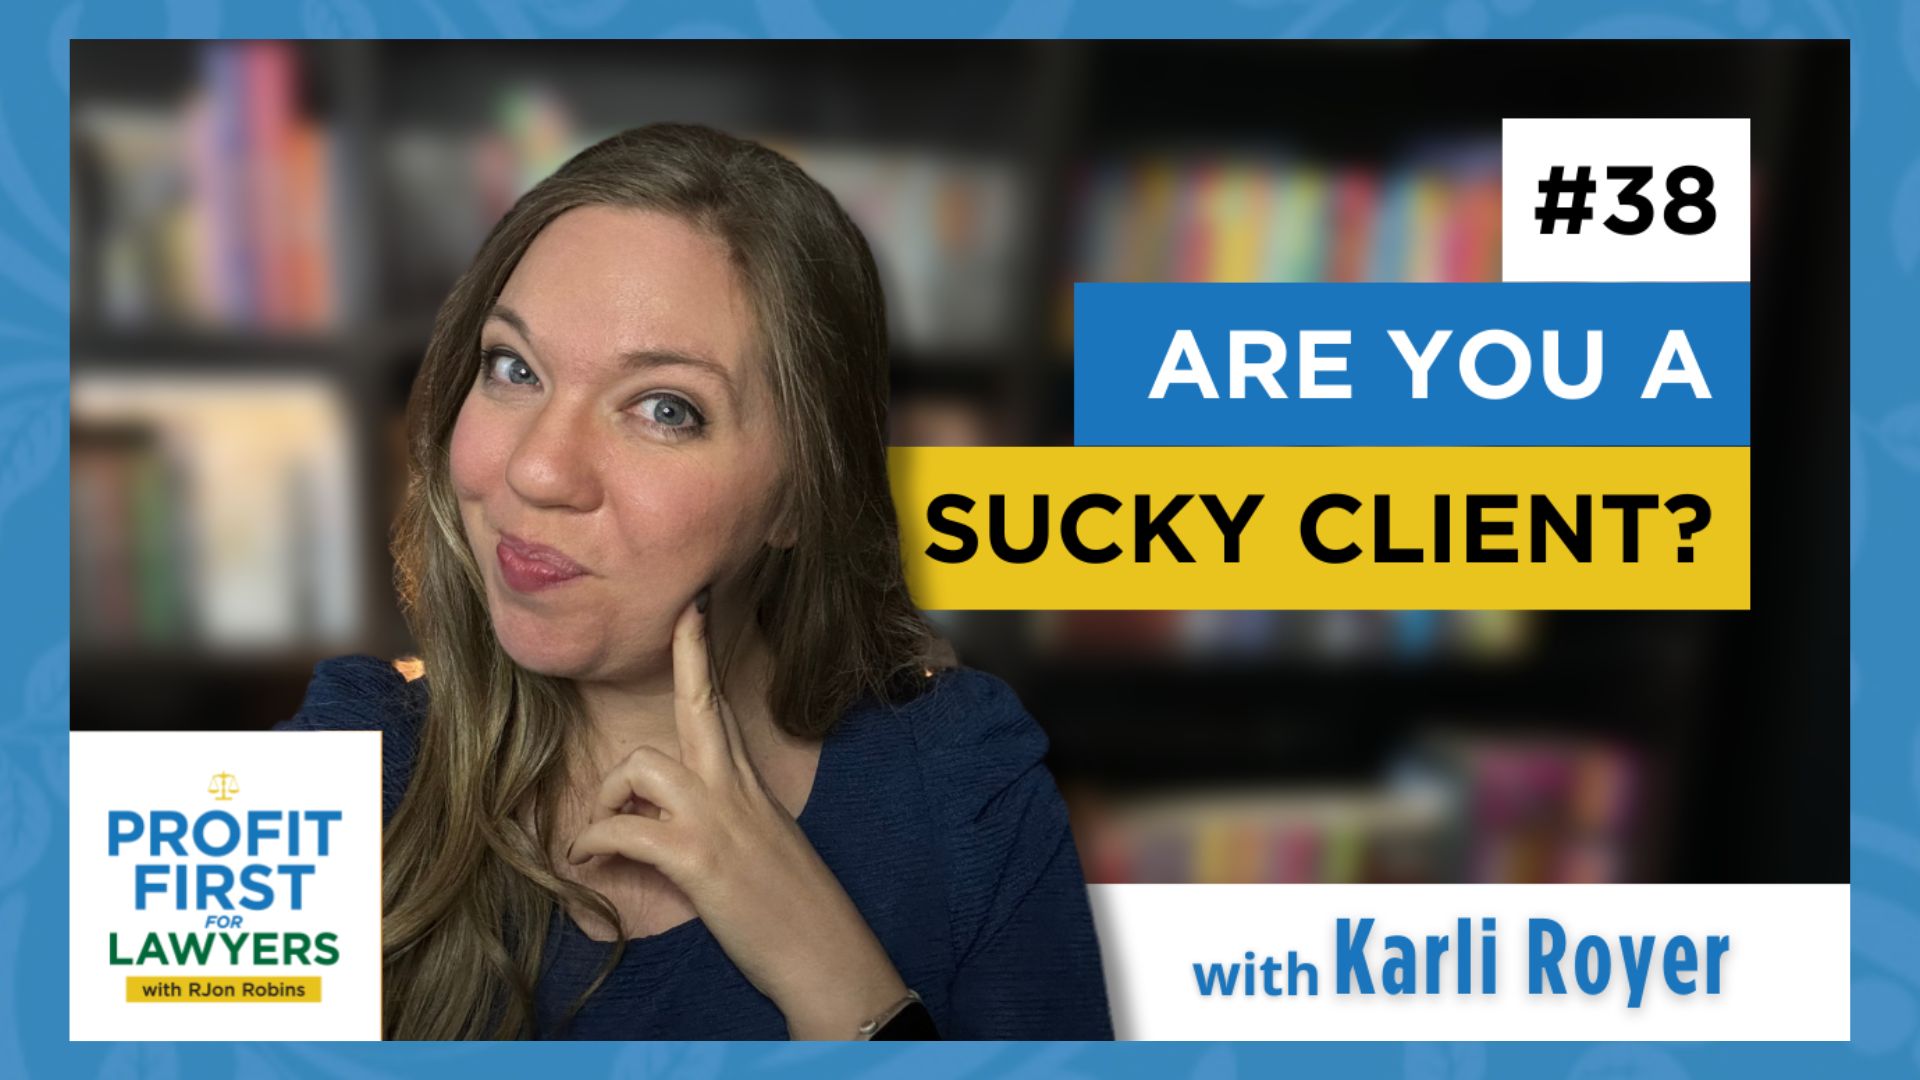 featured image of Karli Royer "Are You A Sucky Client" episode 38 of the Profit First For Lawyers podcast